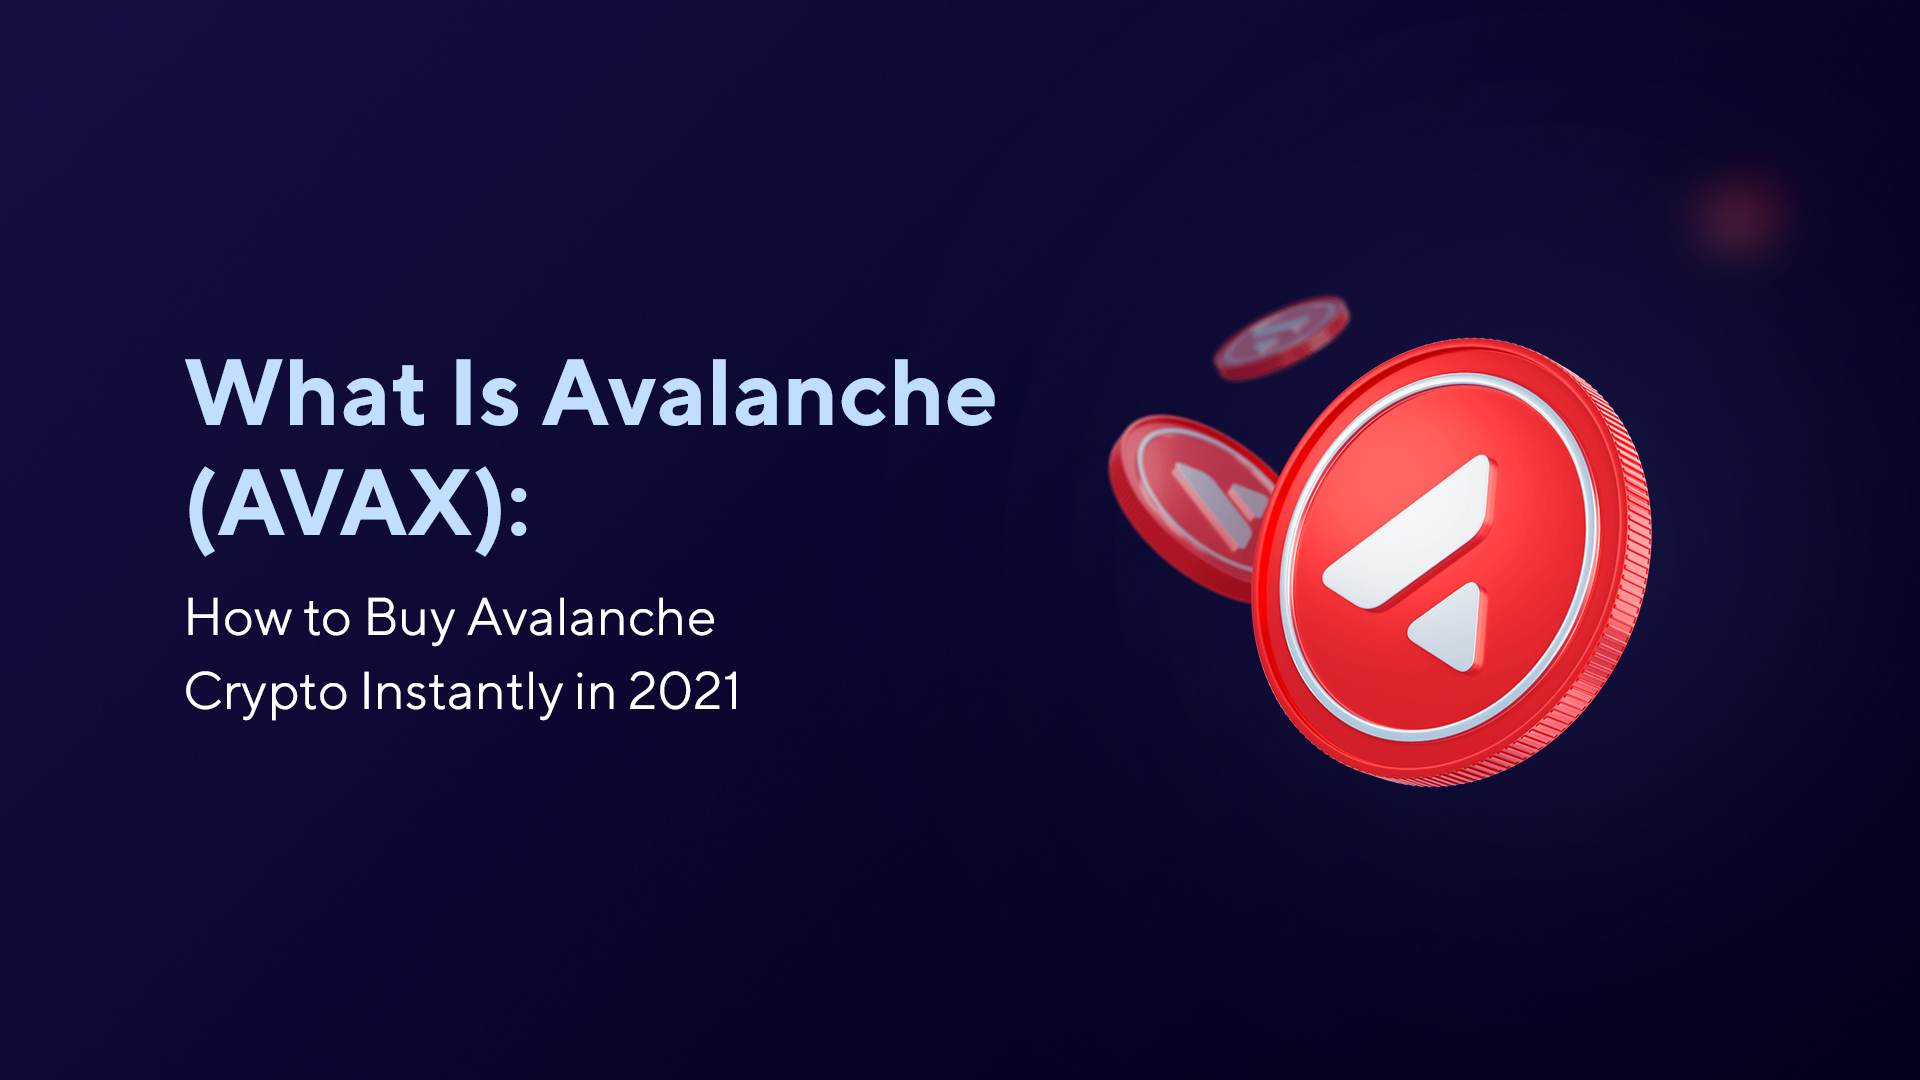 What Is Avalanche (AVAX): How to Buy Avalanche Crypto Instantly in 2021